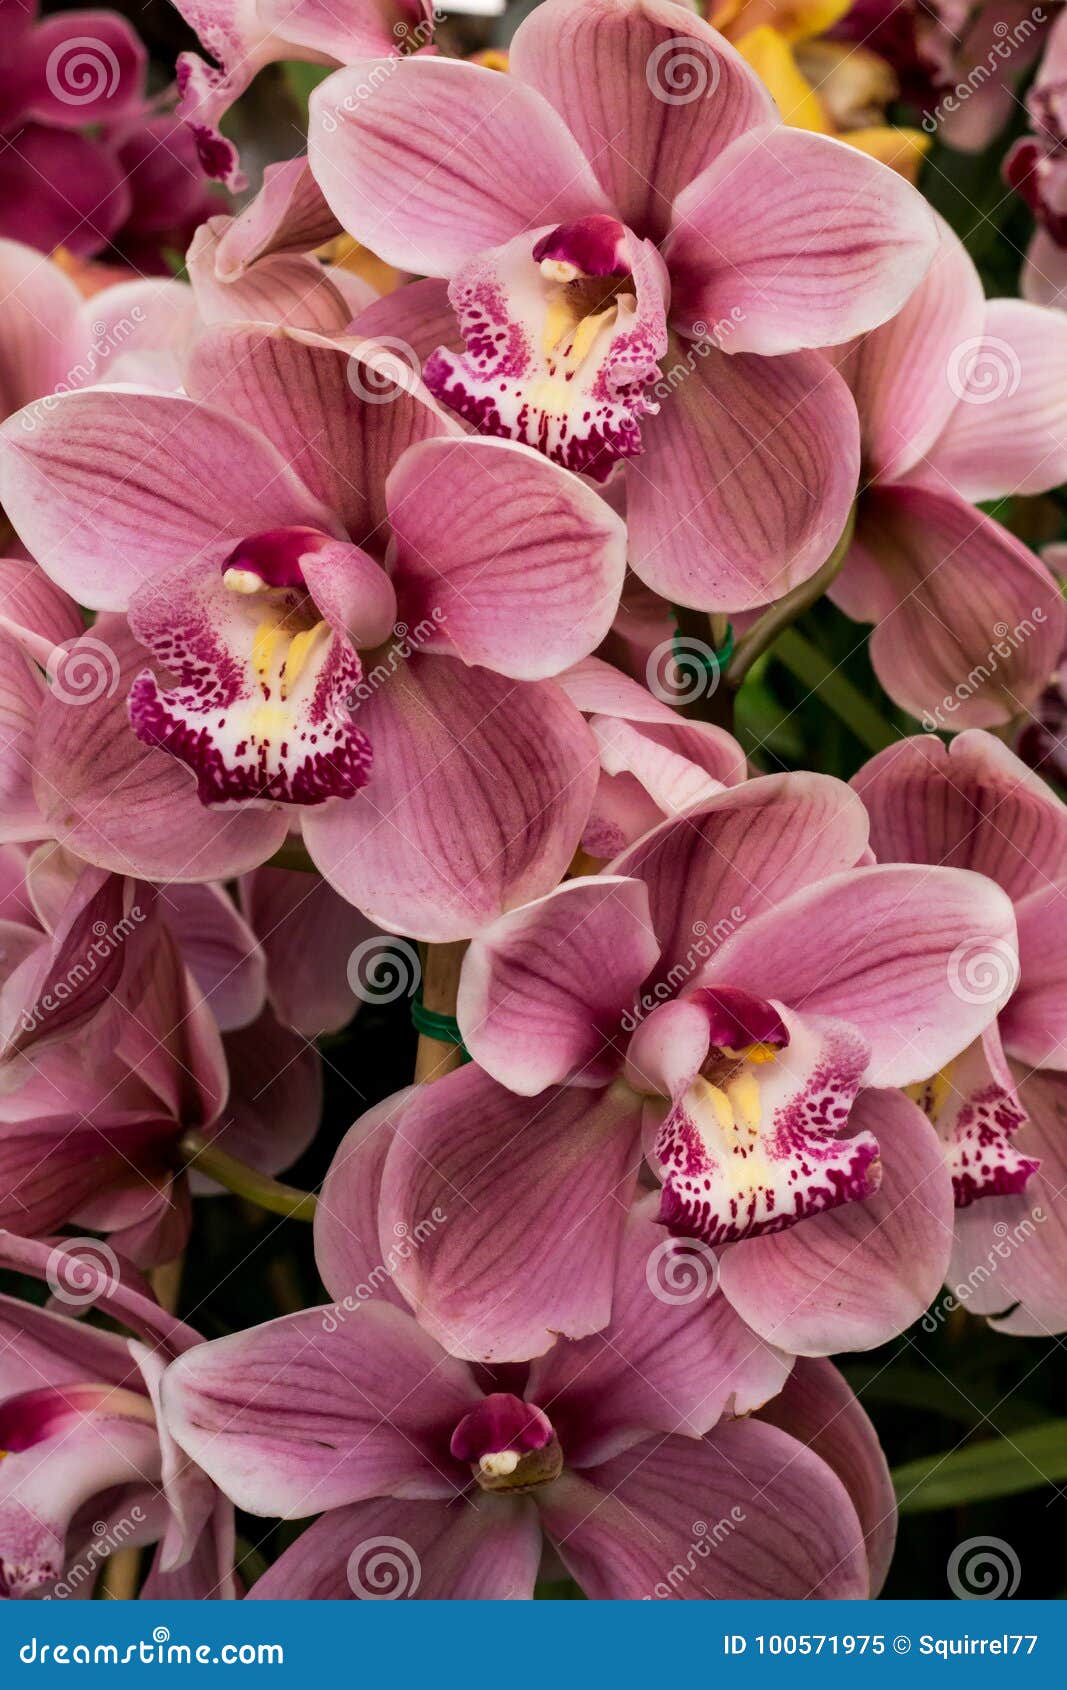 Pink and White Tropical Cymbidium Orchid Flower Blossoms Stock Image -  Image of garden, exotic: 100571975